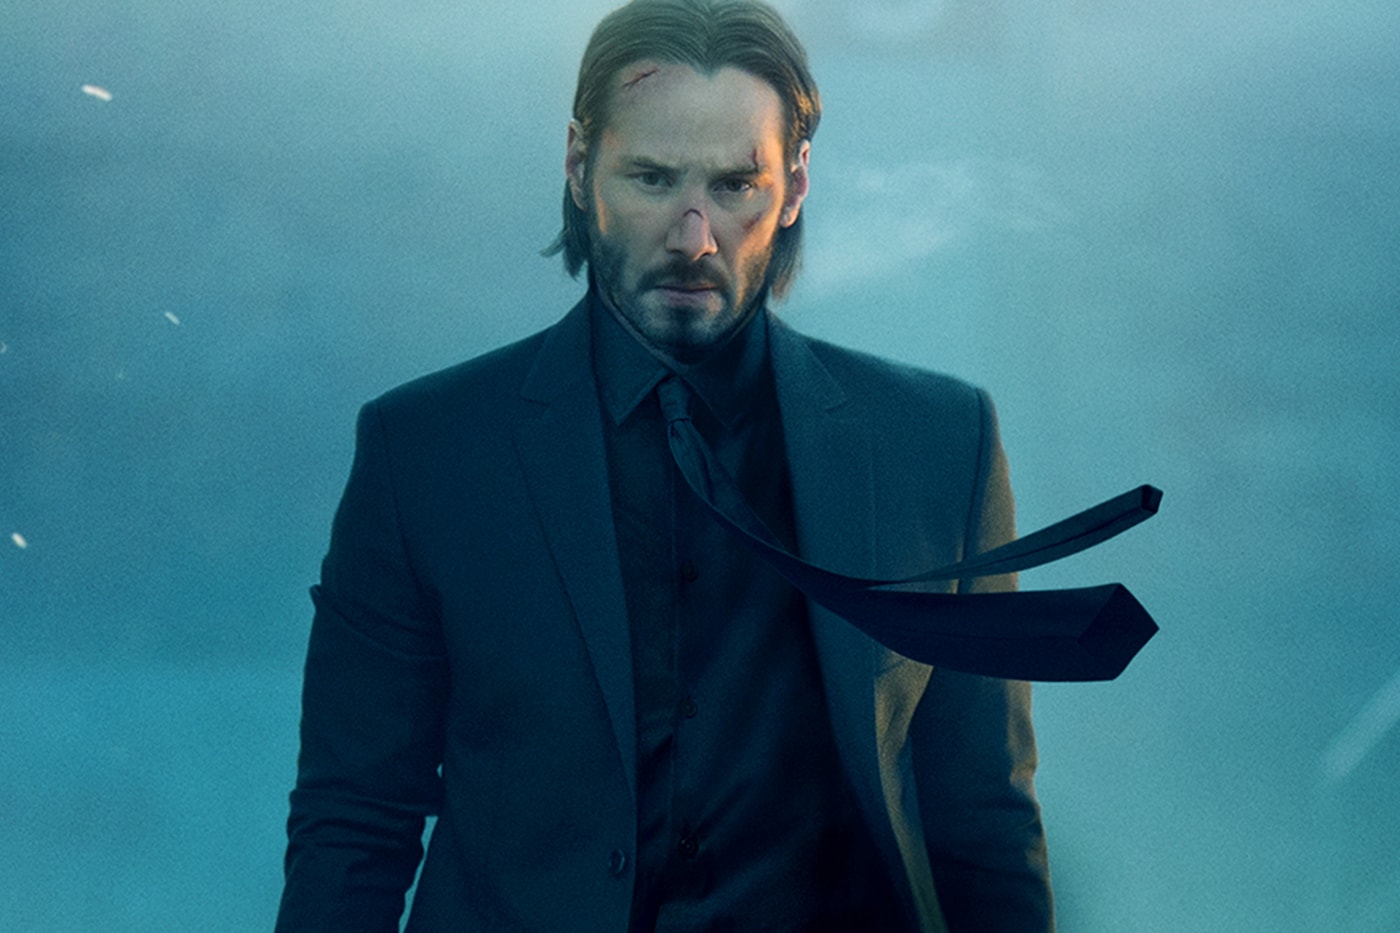 John Wick 2' Adds New and Returning Cast Members